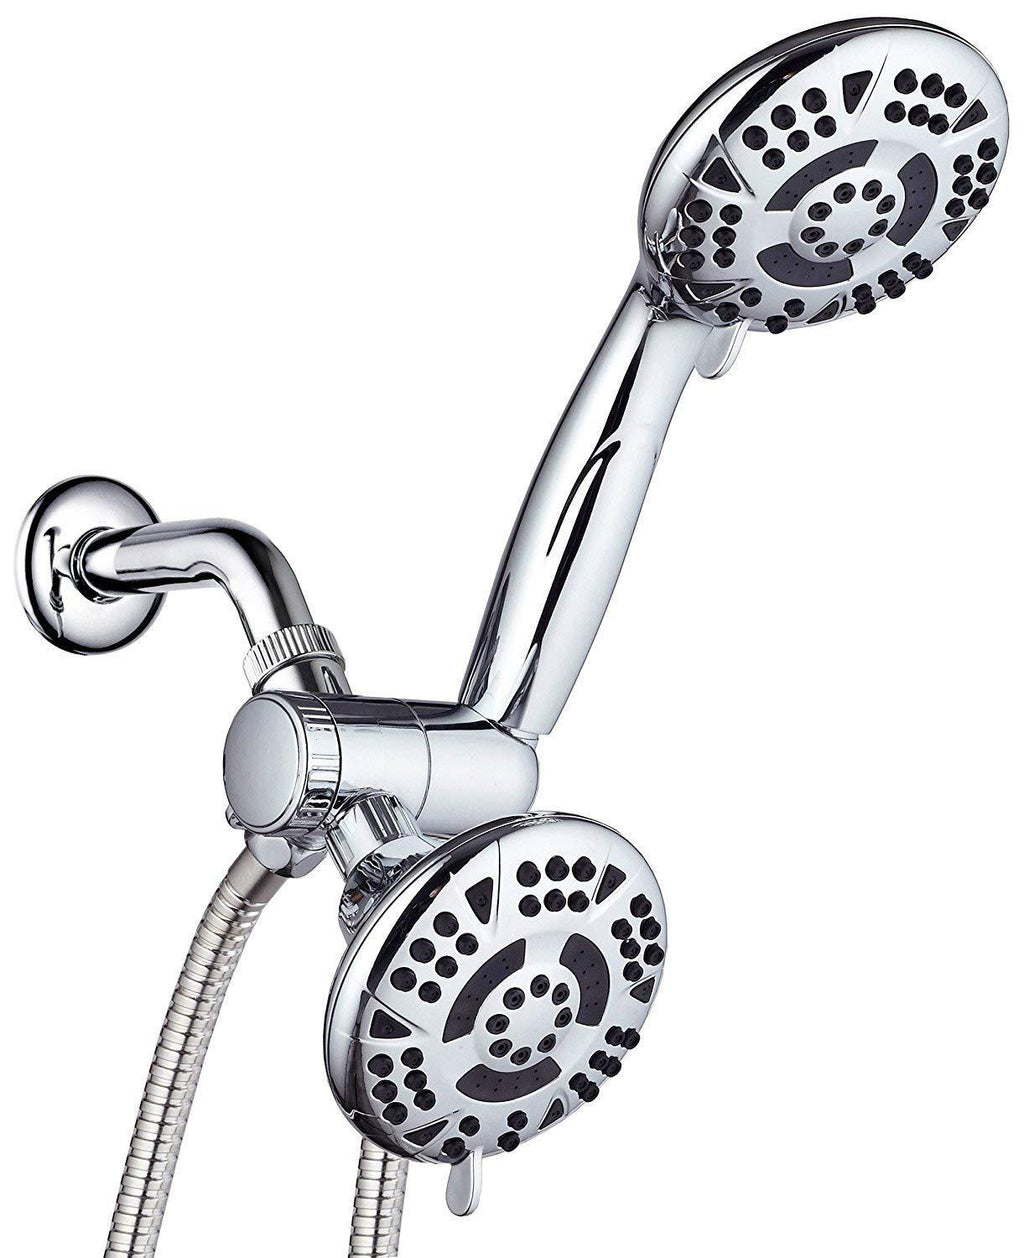 AquaDance High Pressure 3-way Twin Shower Combo Lets You Enjoy Two 4.15" 6-Setting Showers Separately or Together! Officially Independently Tested to Meet Strict US Quality & Performance Standards! - NewNest Australia